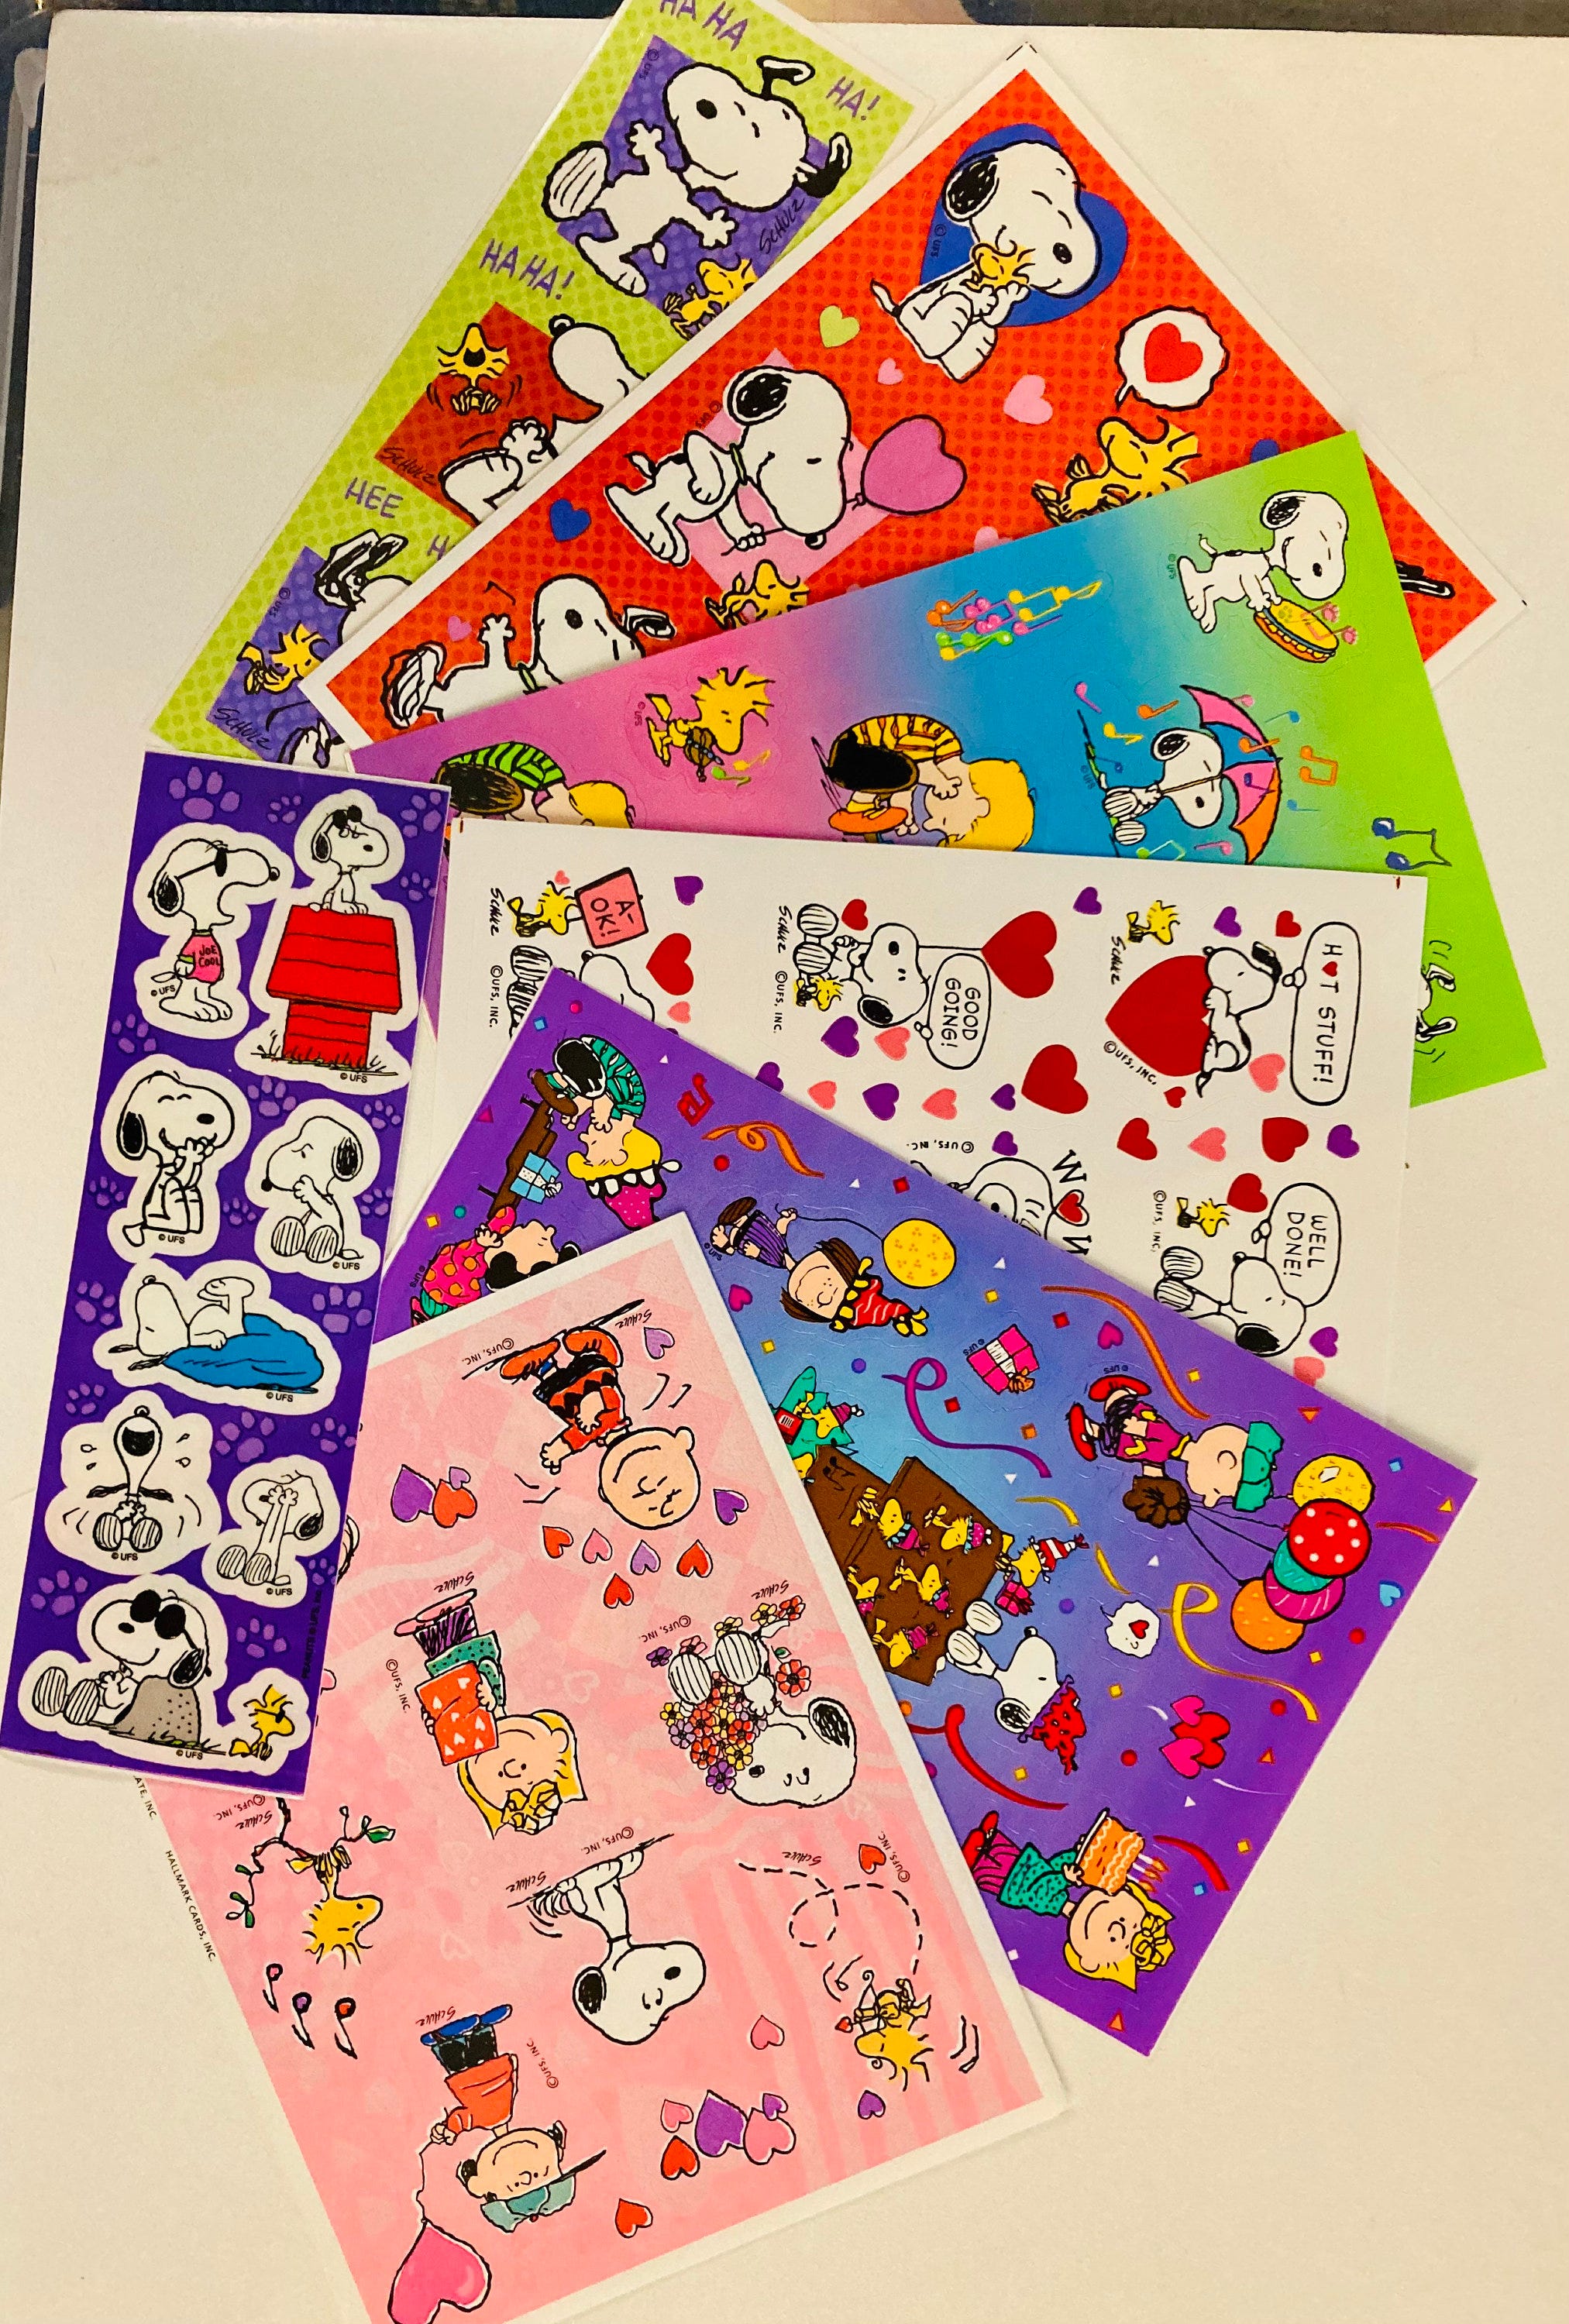 Snoopy,Woodstock Peanuts Characters Vintage Stickers, Full Sheet Stickers,Joe Cool,Party,Fun,Good Job,Classic Snoopy & Gang stickers